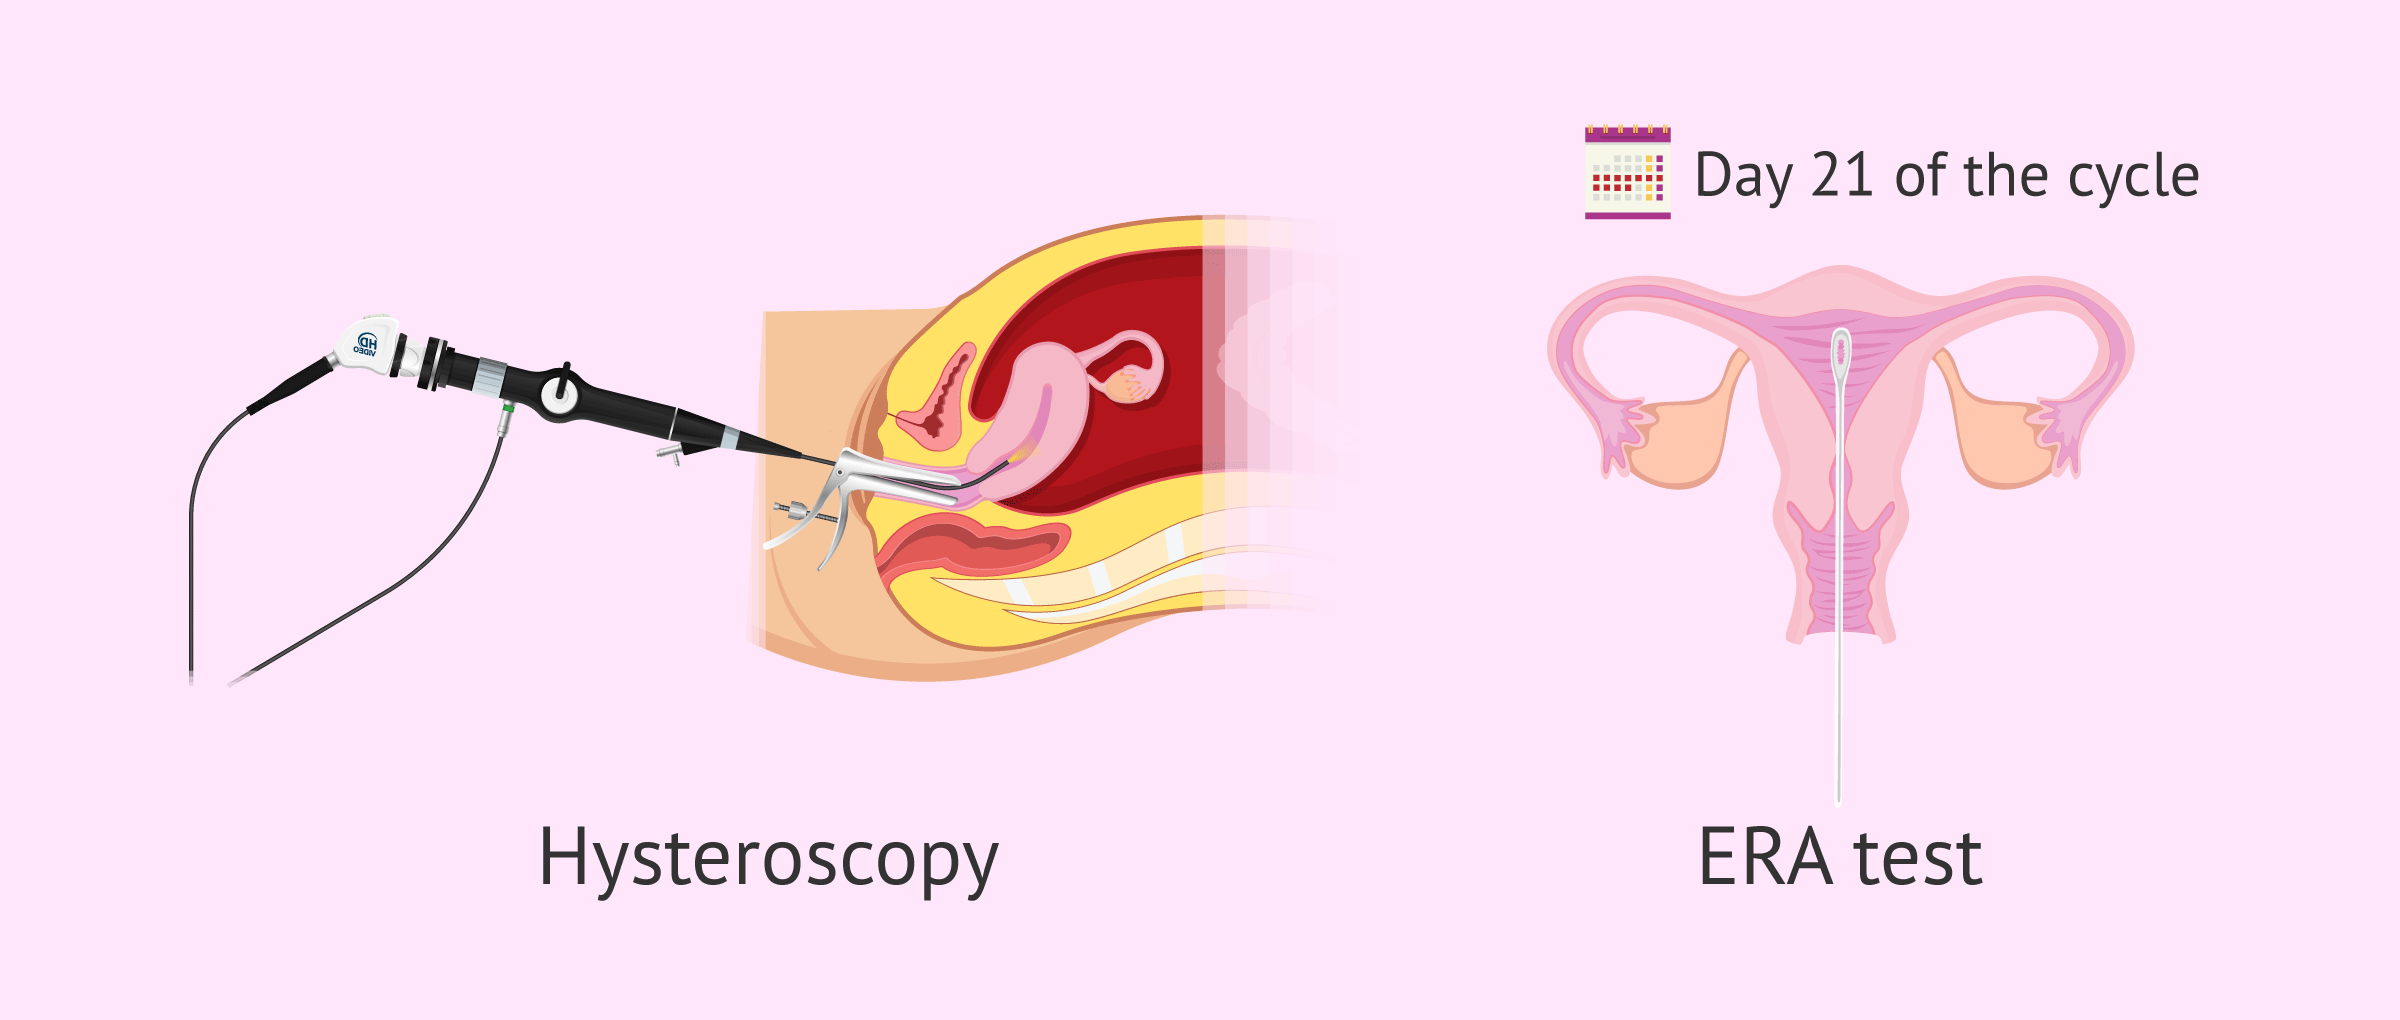 Complementary techniques to study the endometrium